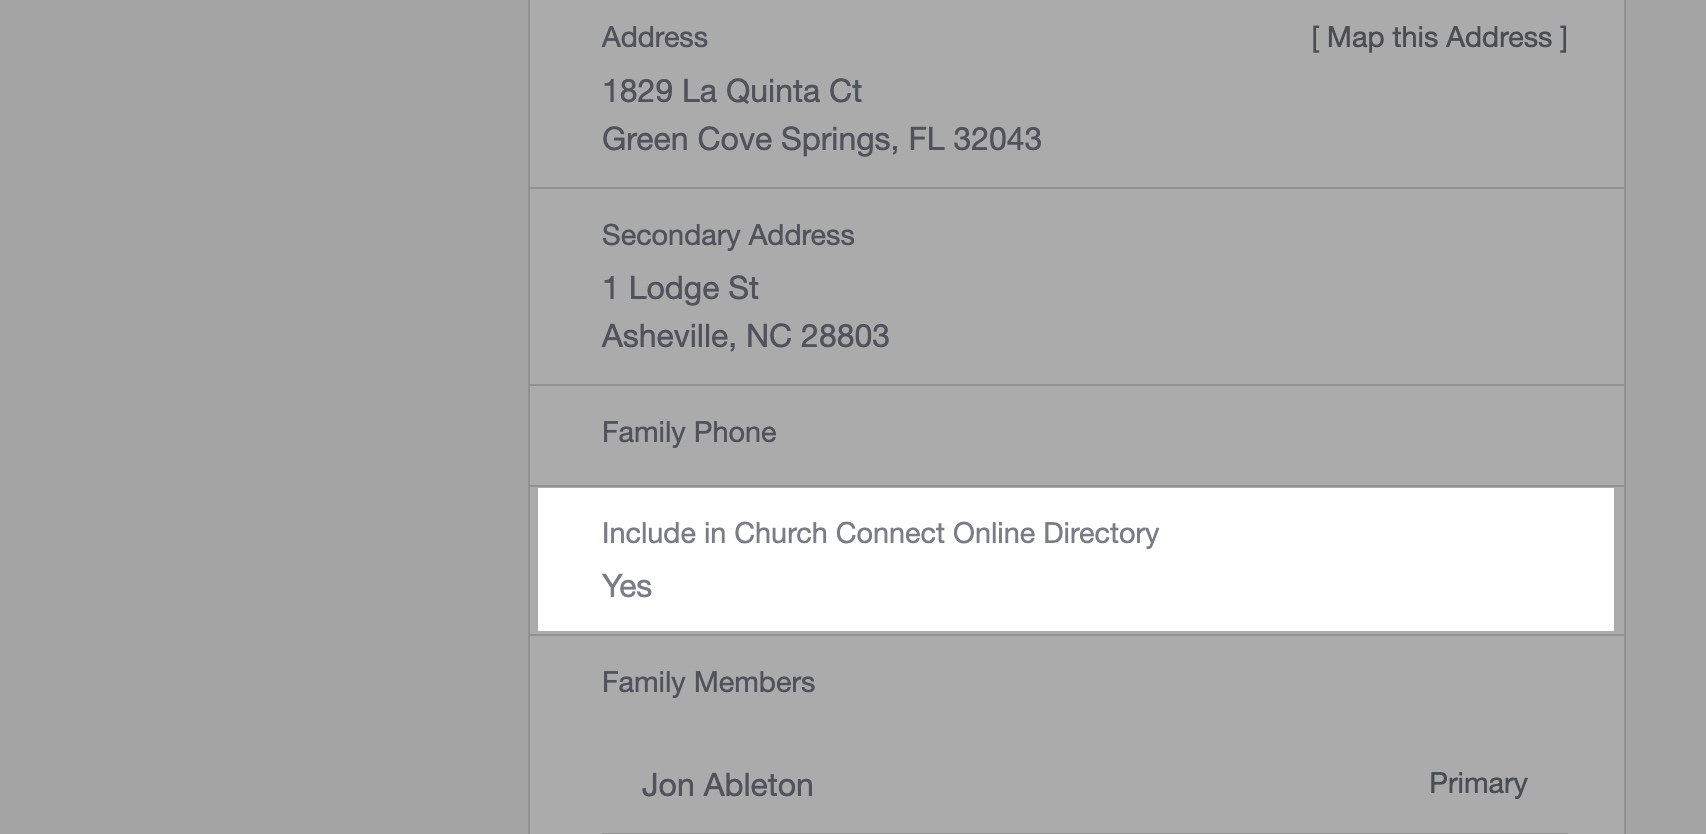 Include in Church Connect Online Directory